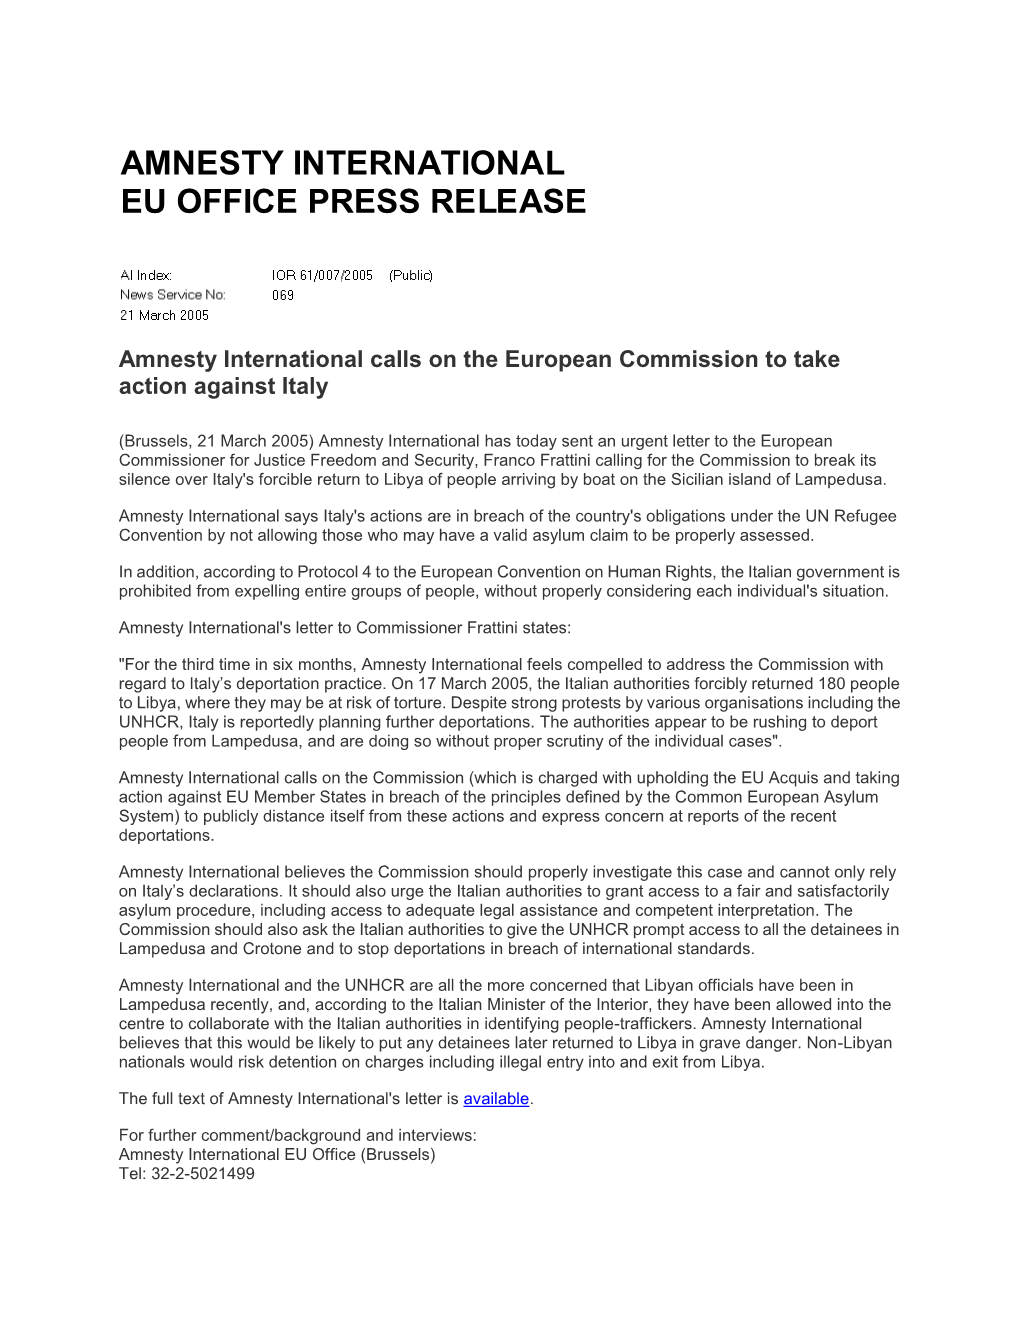 Amnesty International Calls on the European Commission to Take Action Against Italy